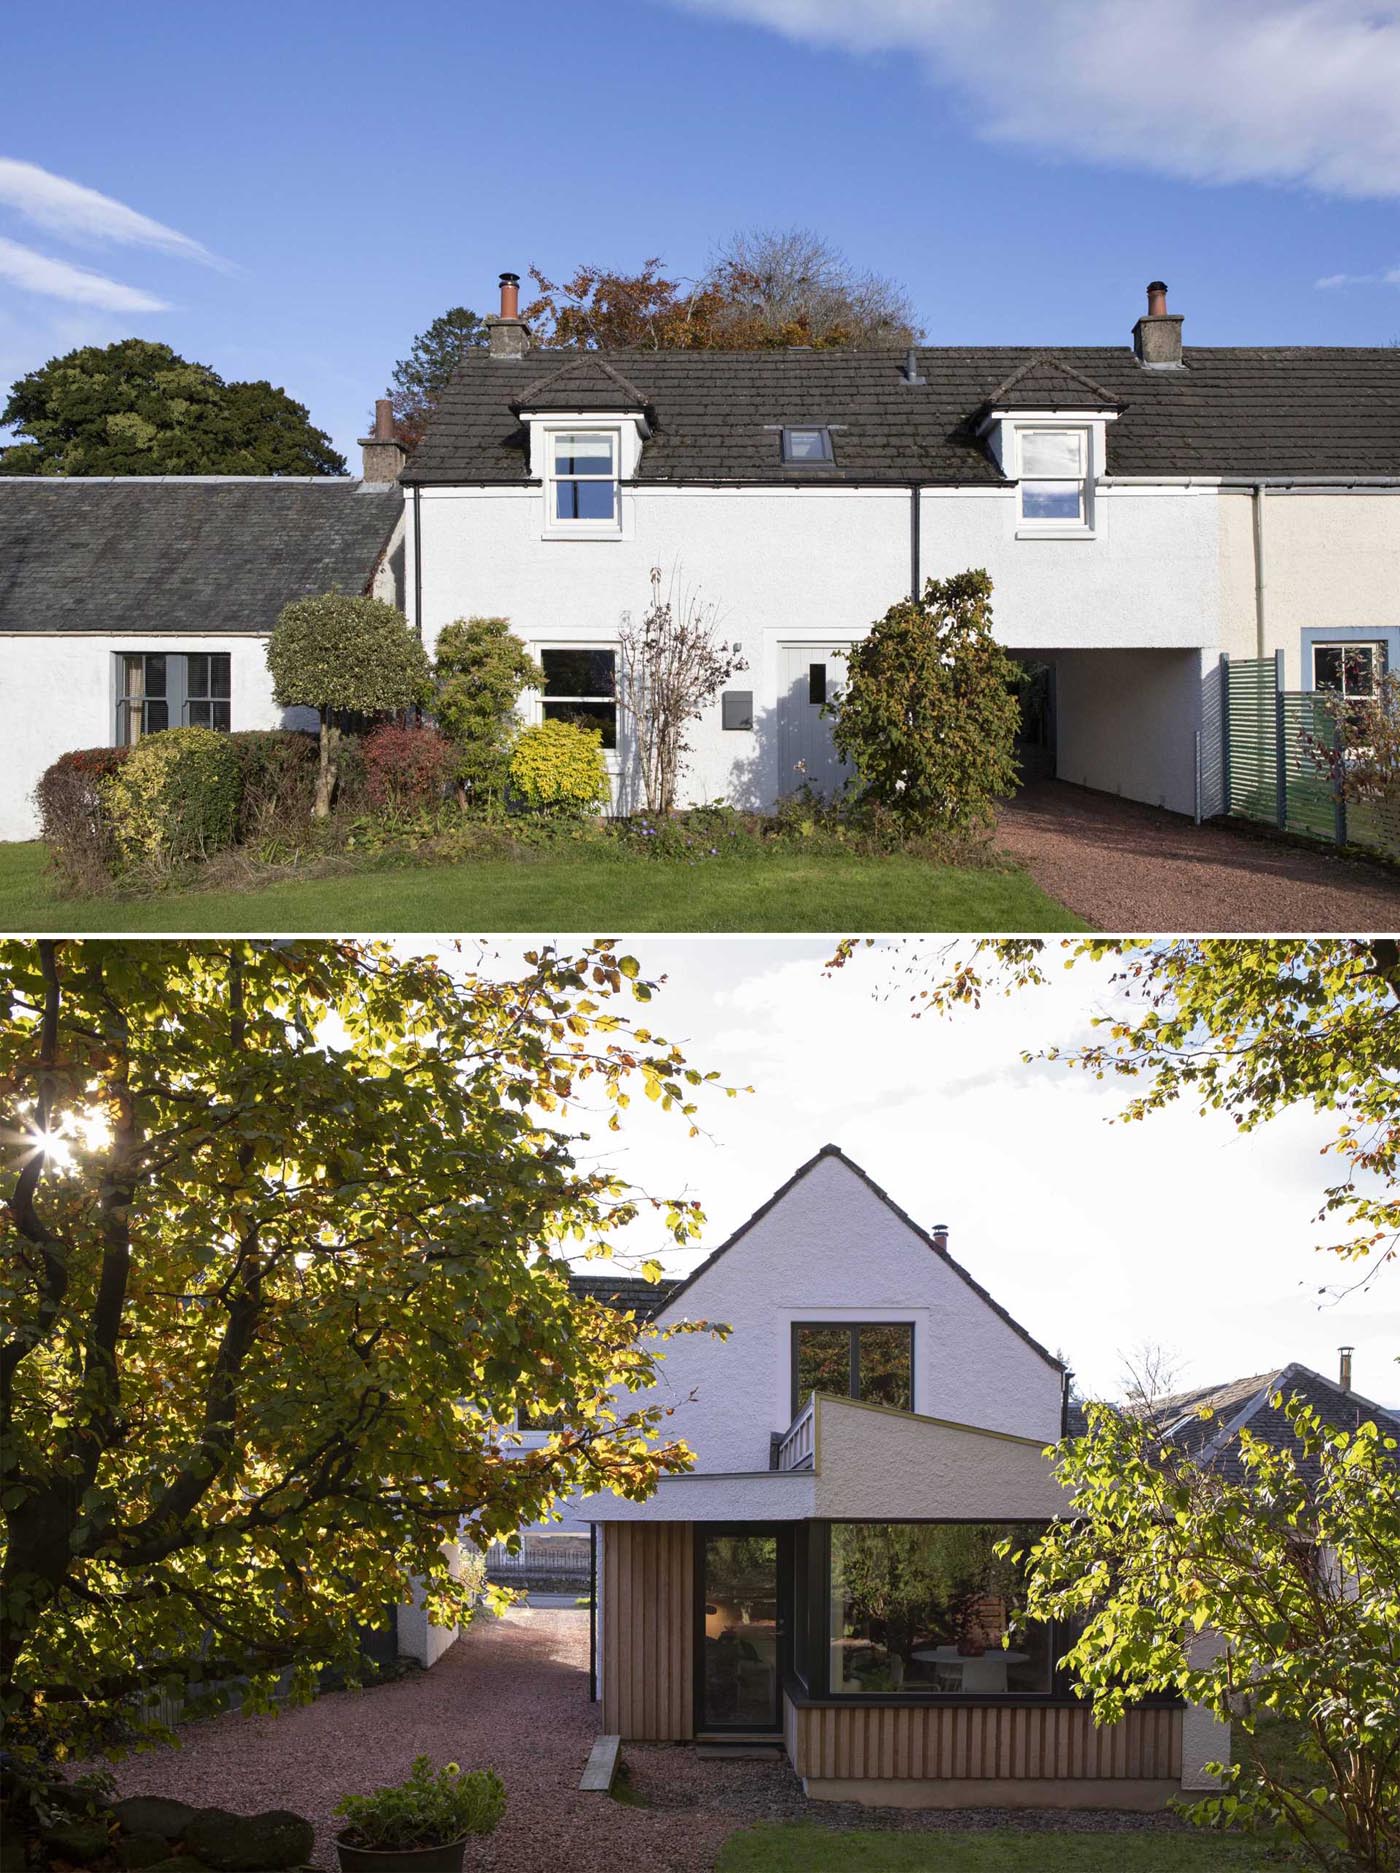 Loader Monteith Architects has completed the reconfiguration and rear extension of a 1980's cottage in a Conservation Village in Scotland.